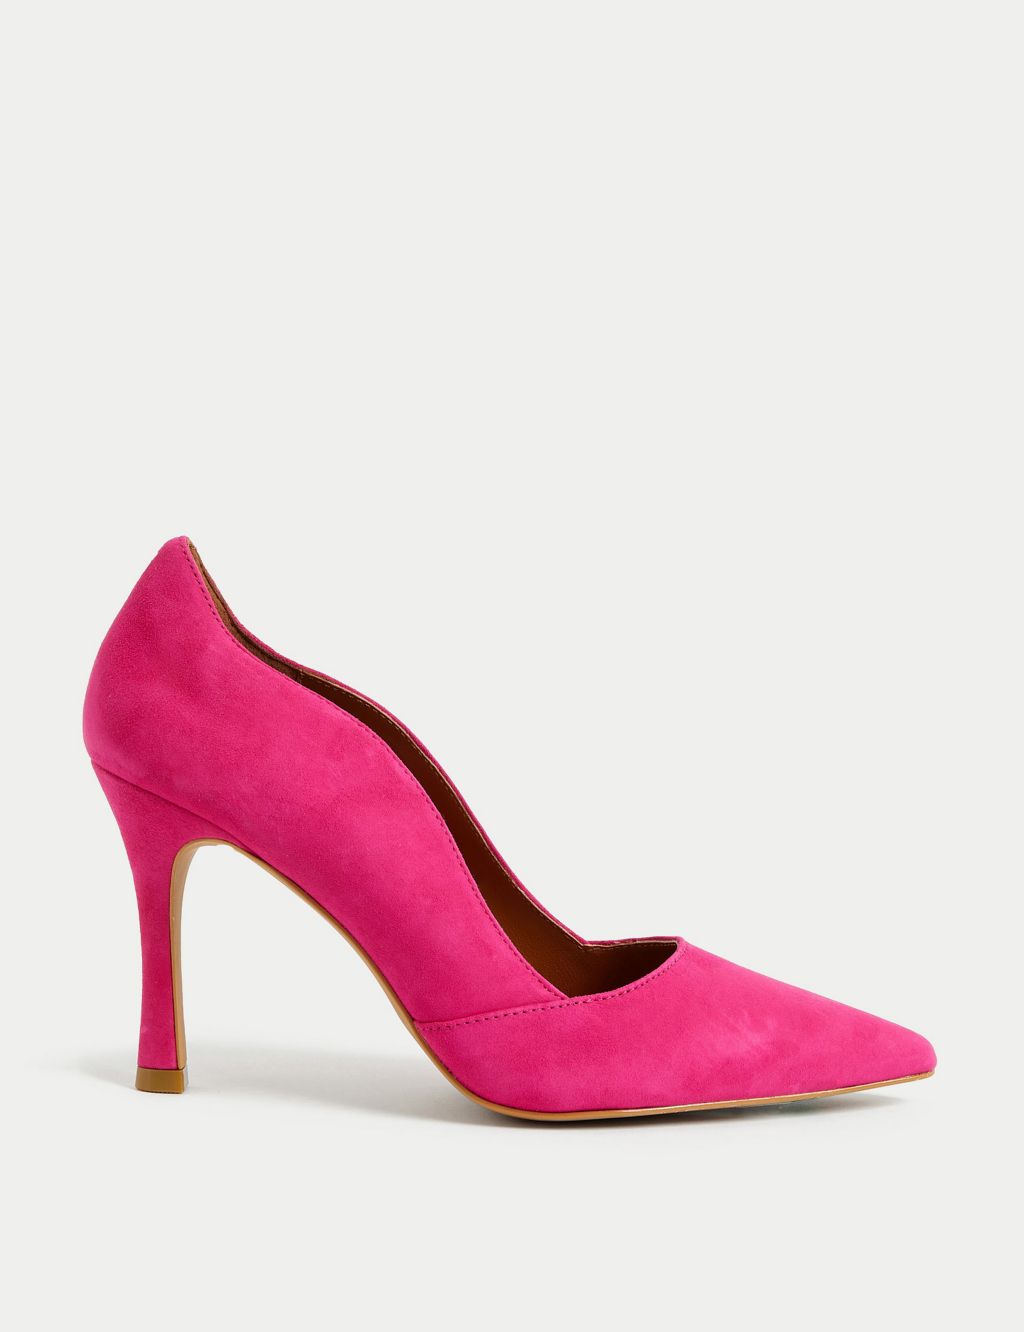 Suede Stiletto Heel Pointed Court Shoes image 1